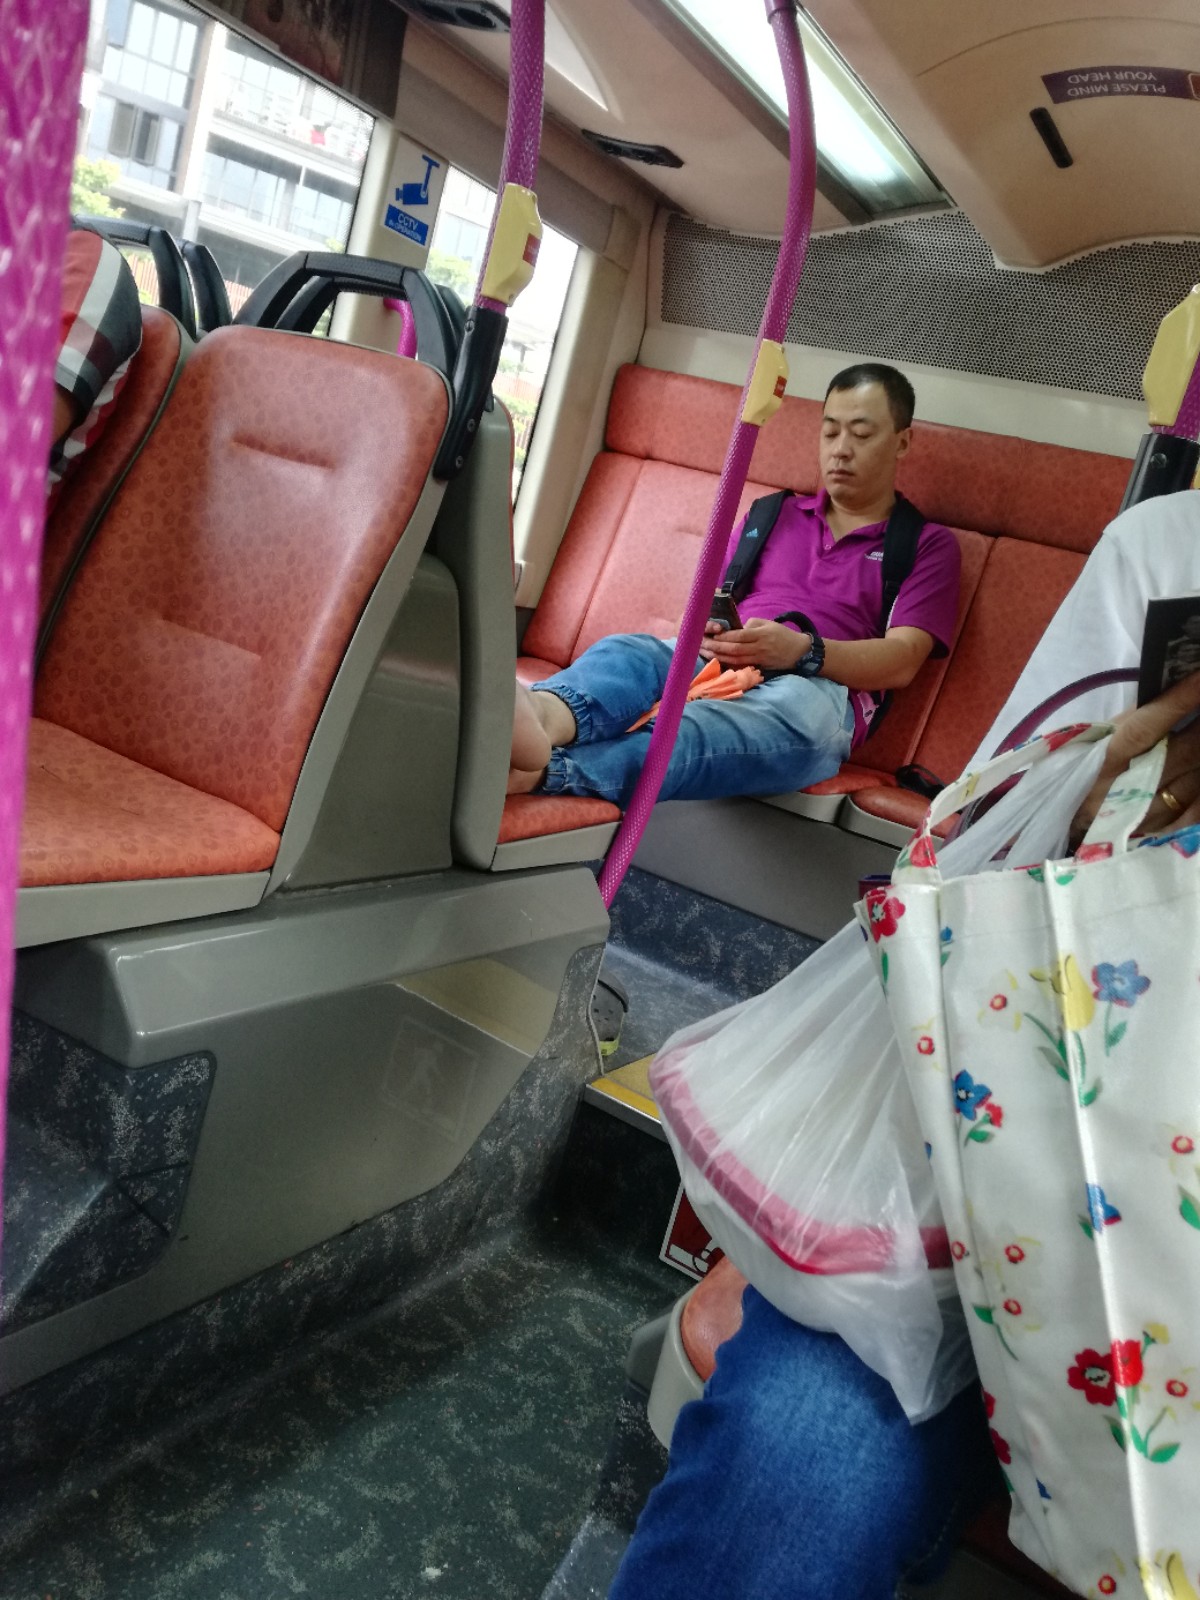 Man occupying 4 seats on the bus, can something be done about these selfish people?